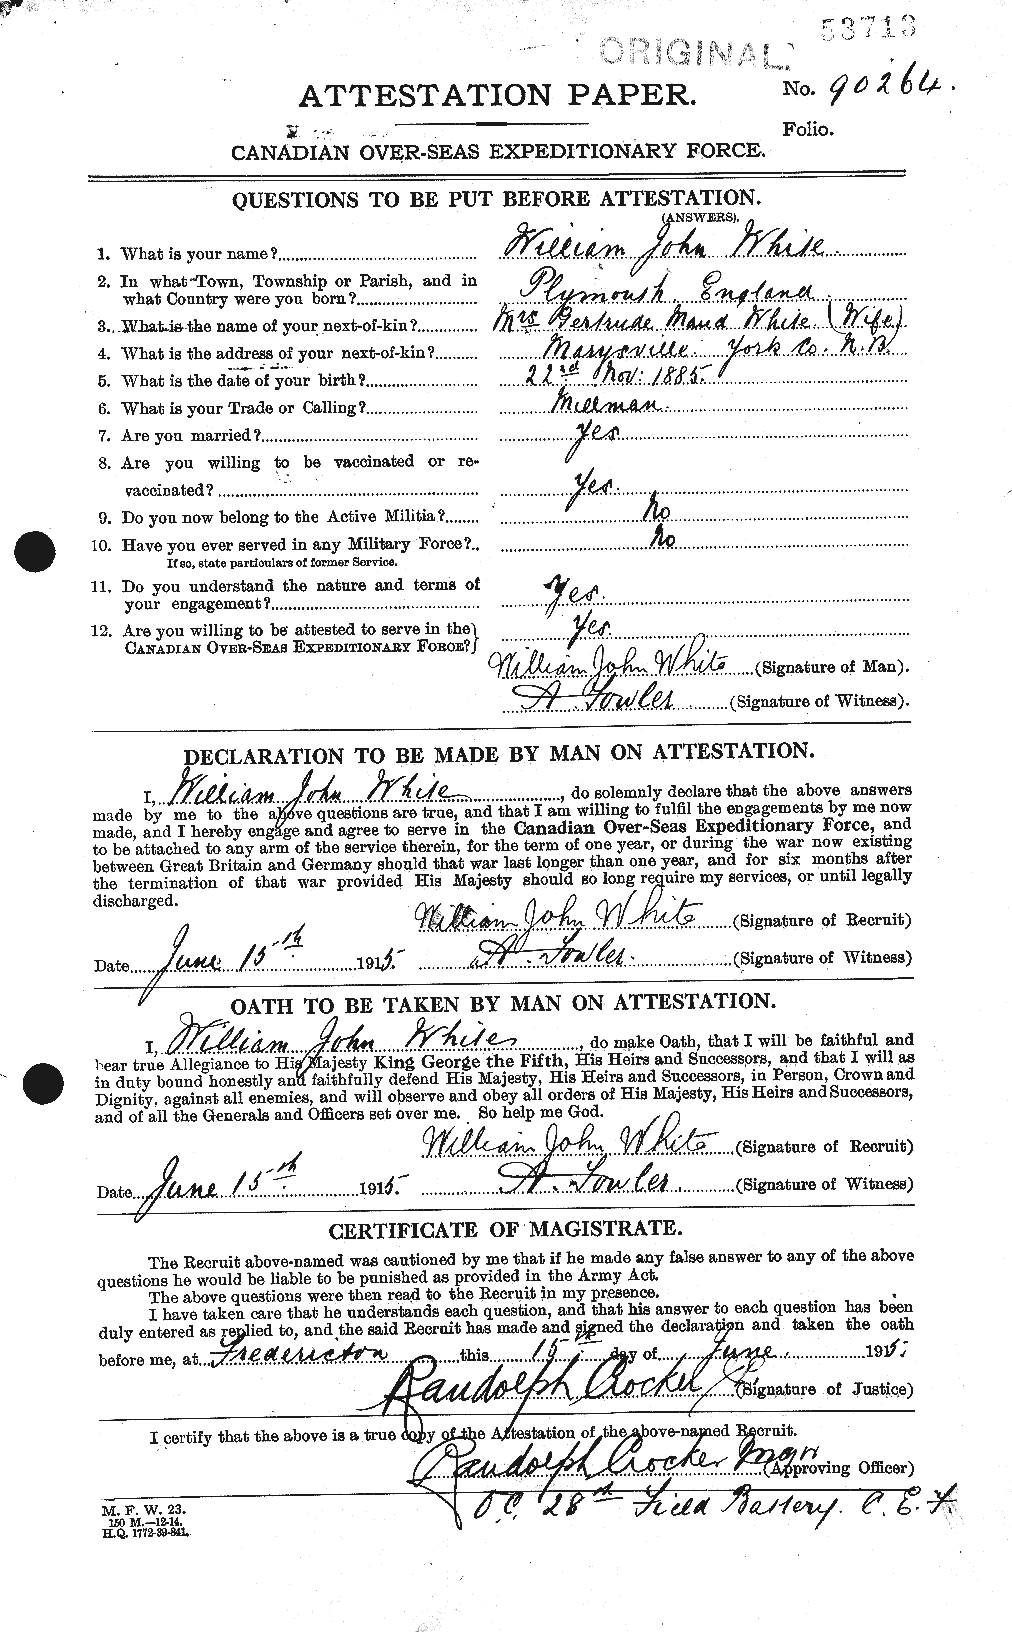 Personnel Records of the First World War - CEF 669046a